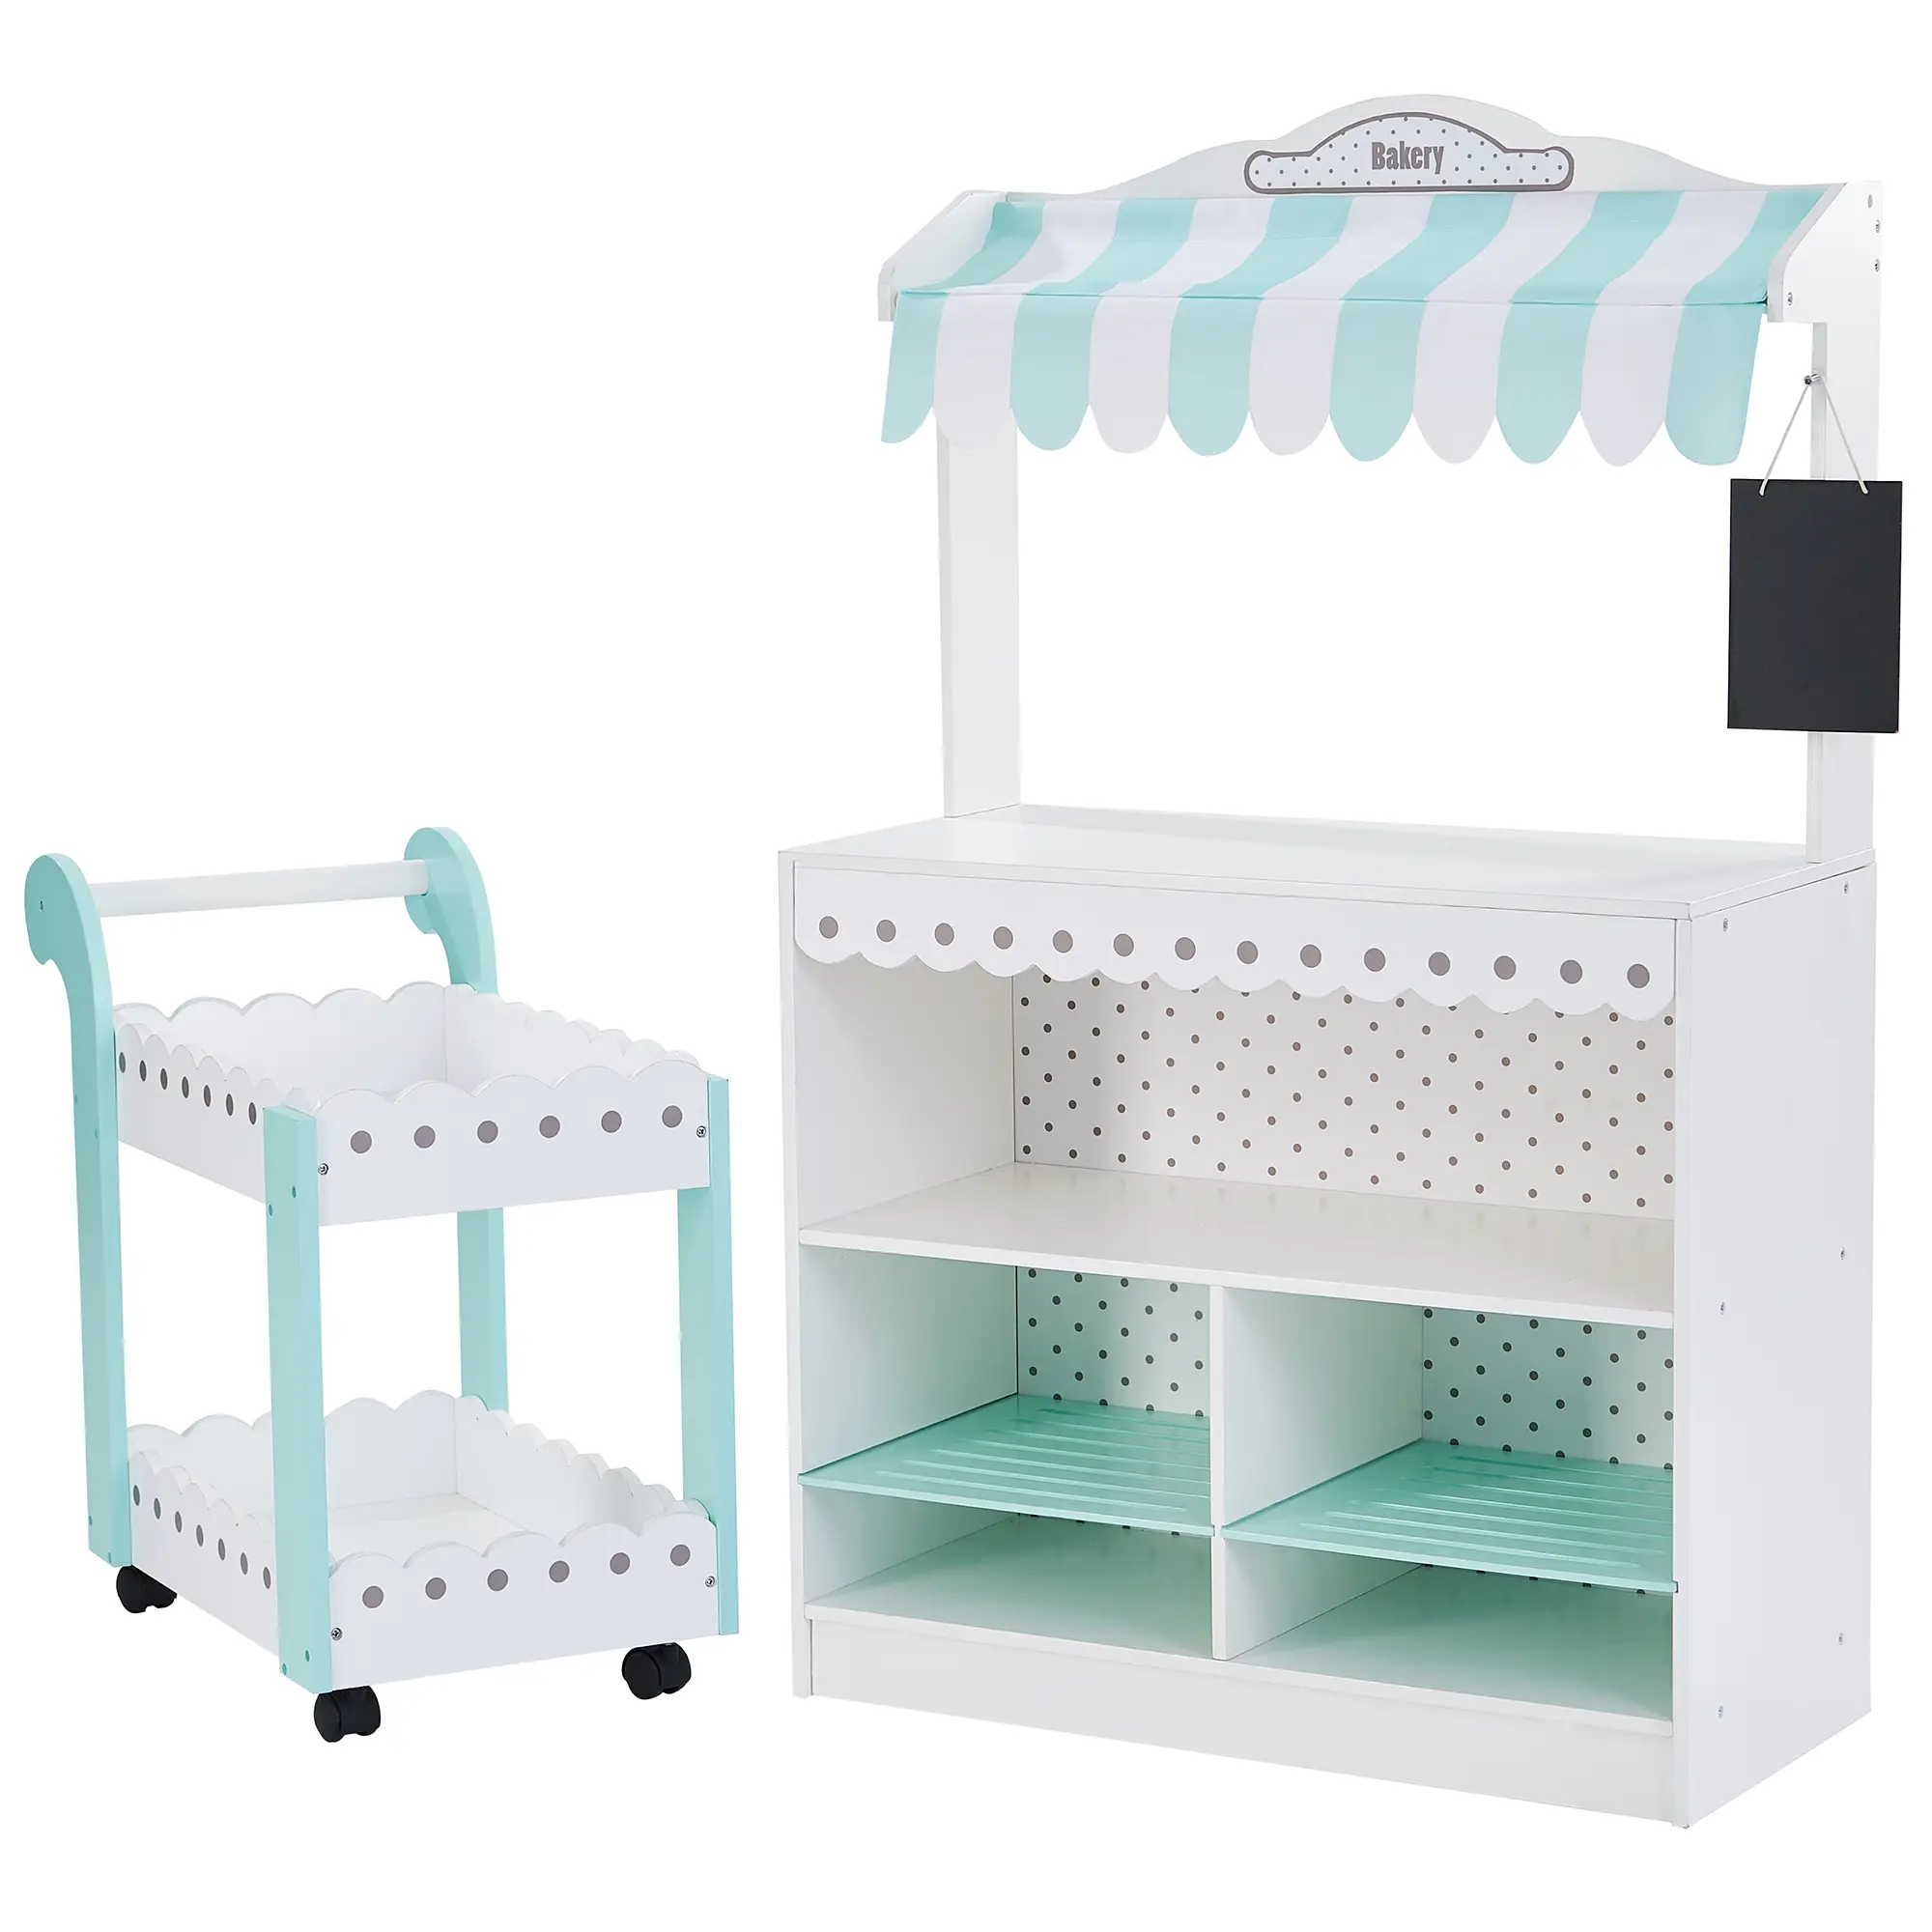 Stand Desert Kinder Play Stand TD-13003A